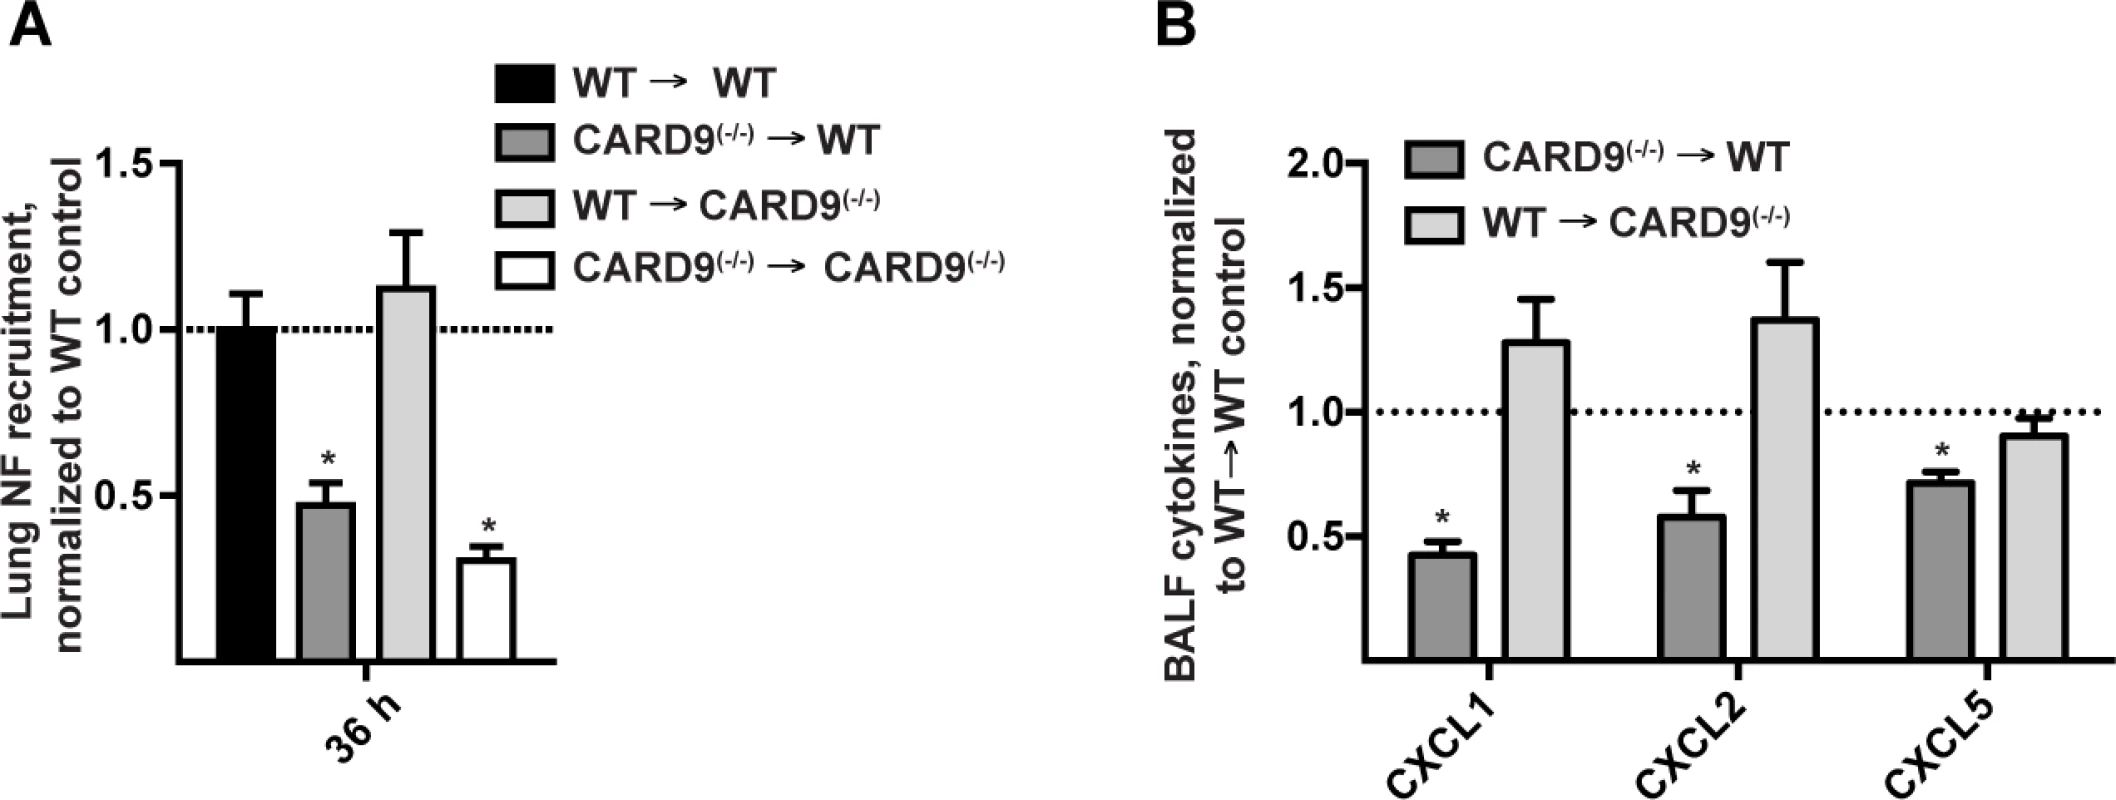 Hematopoietic CARD9 signaling drives neutrophil recruitment and chemokine induction.